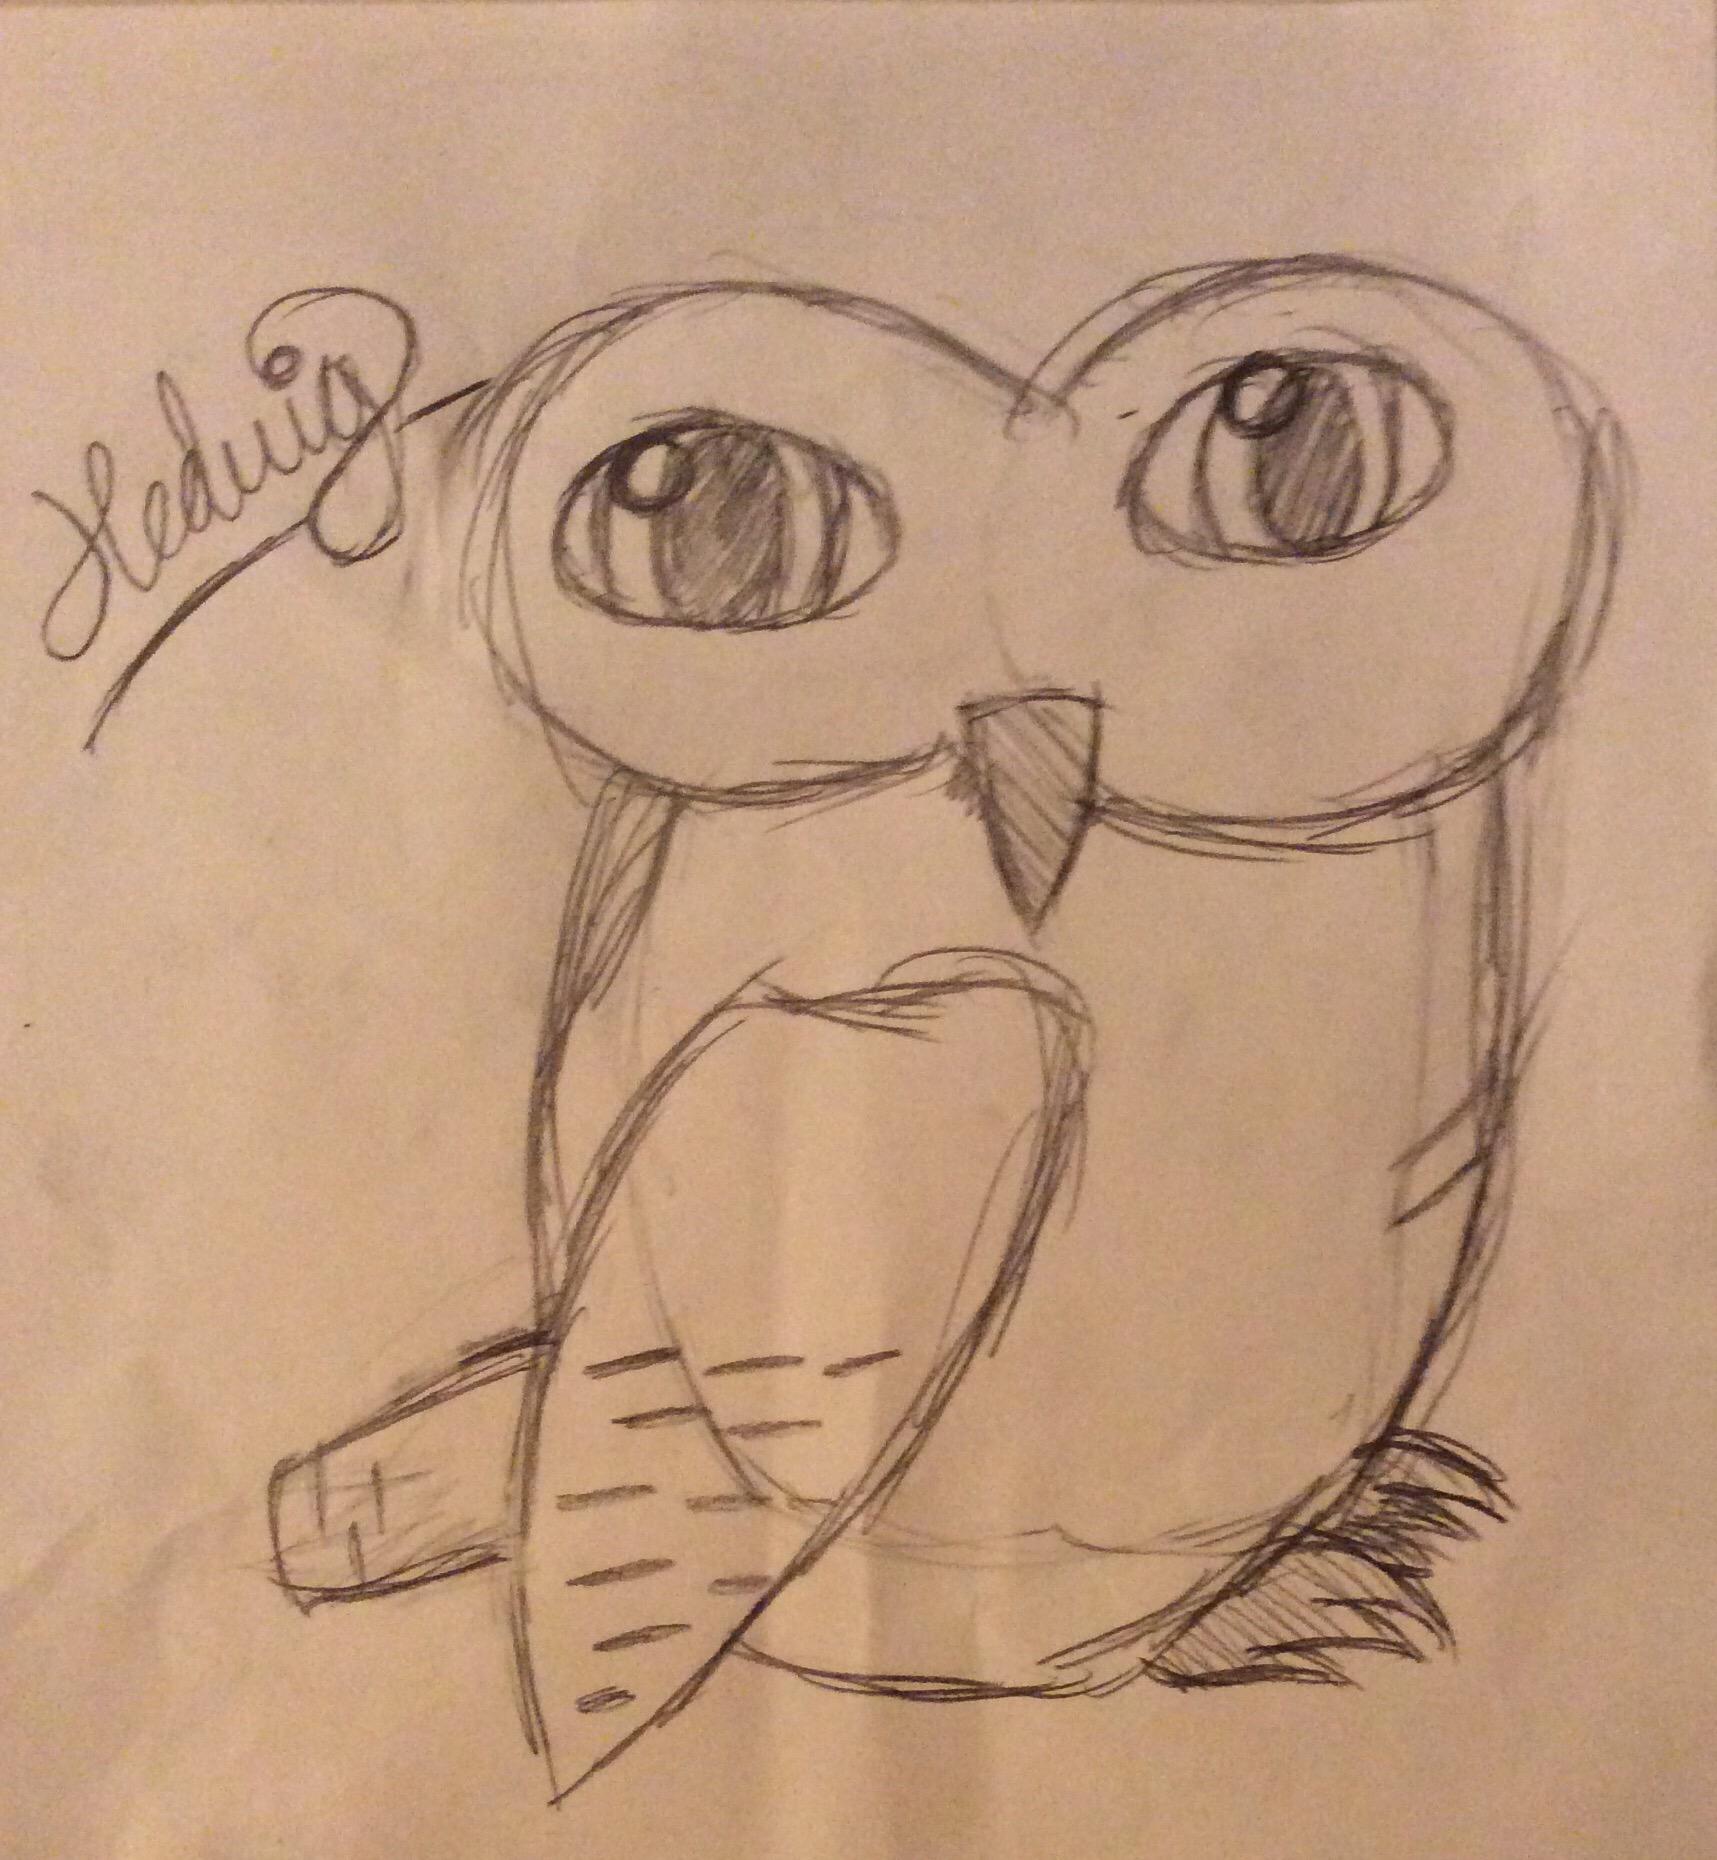 How to Draw Hedwig, Harry Potter's Snowy Owl – Draw Fluffy